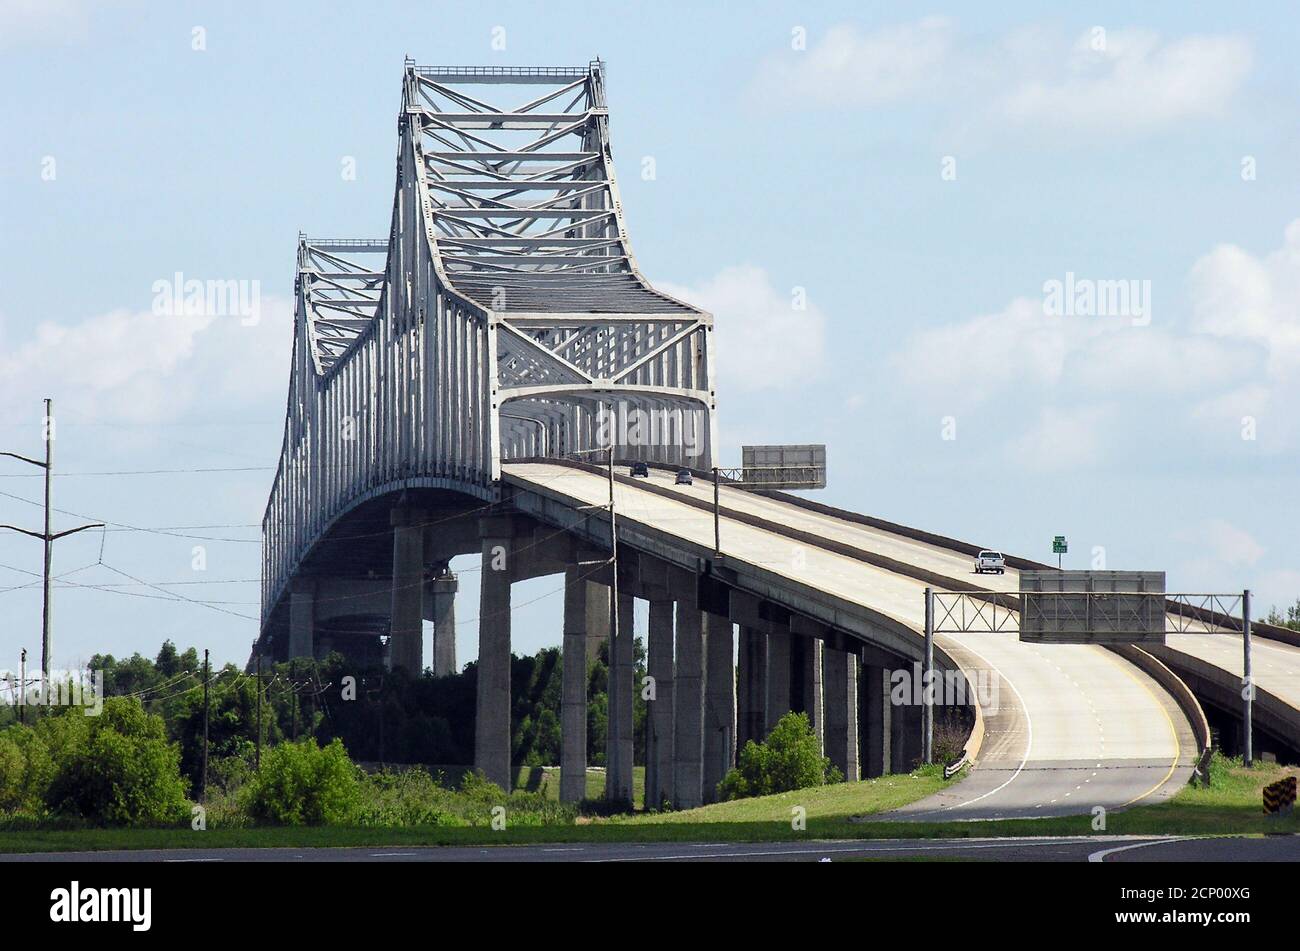 Towering historic Gramercy Bridge over the Mississippi river in rural Louisiana. Stock Photo